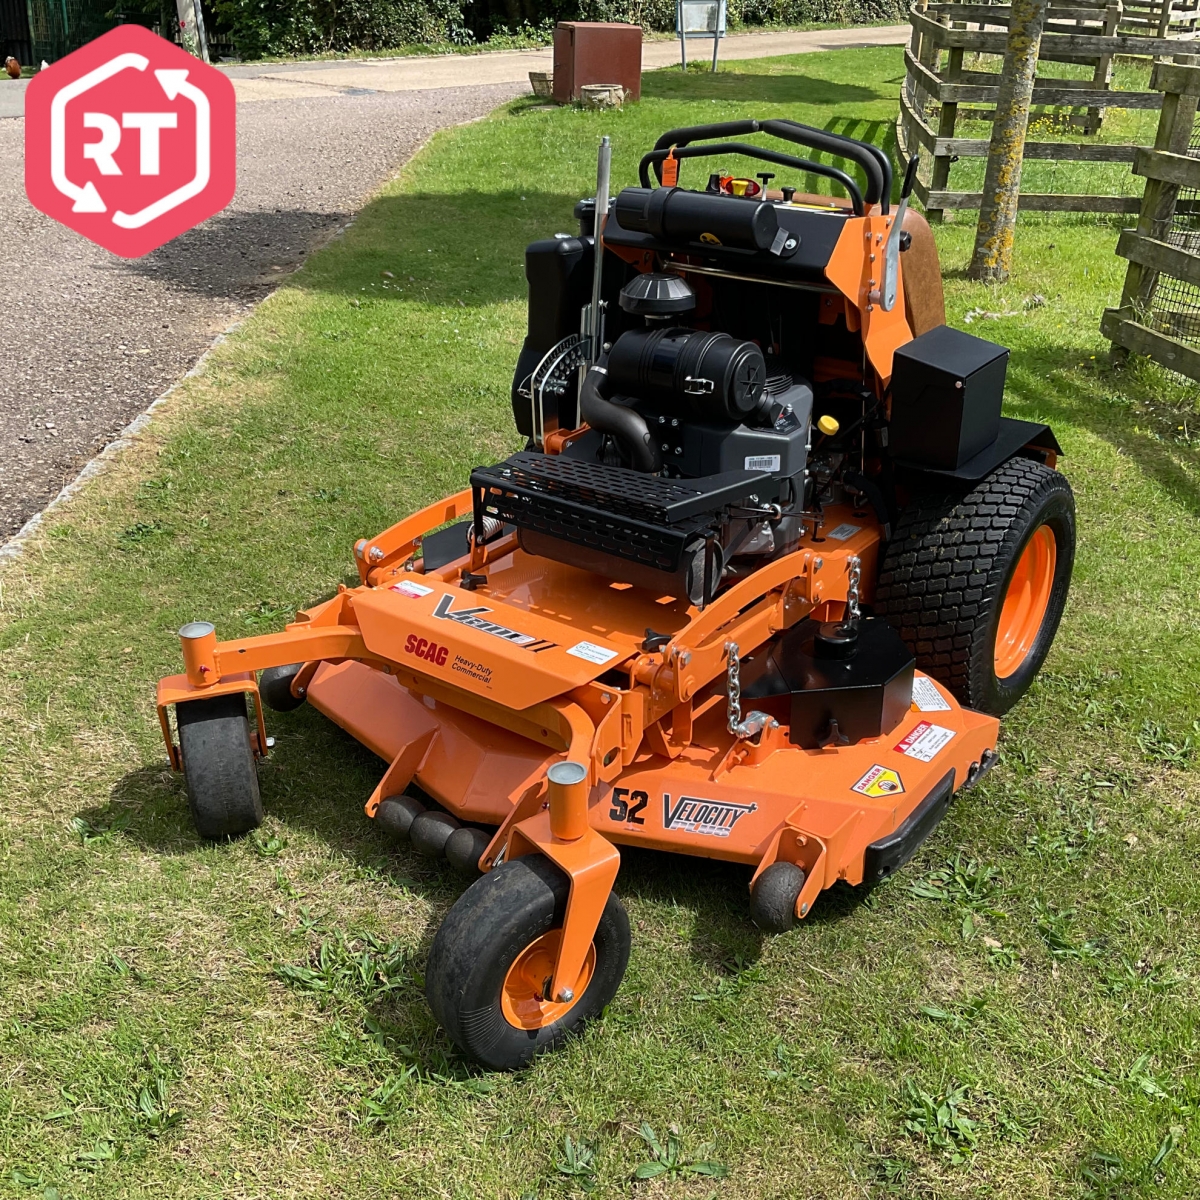 Scag V-Ride II 52” Stand-on Mower - Used